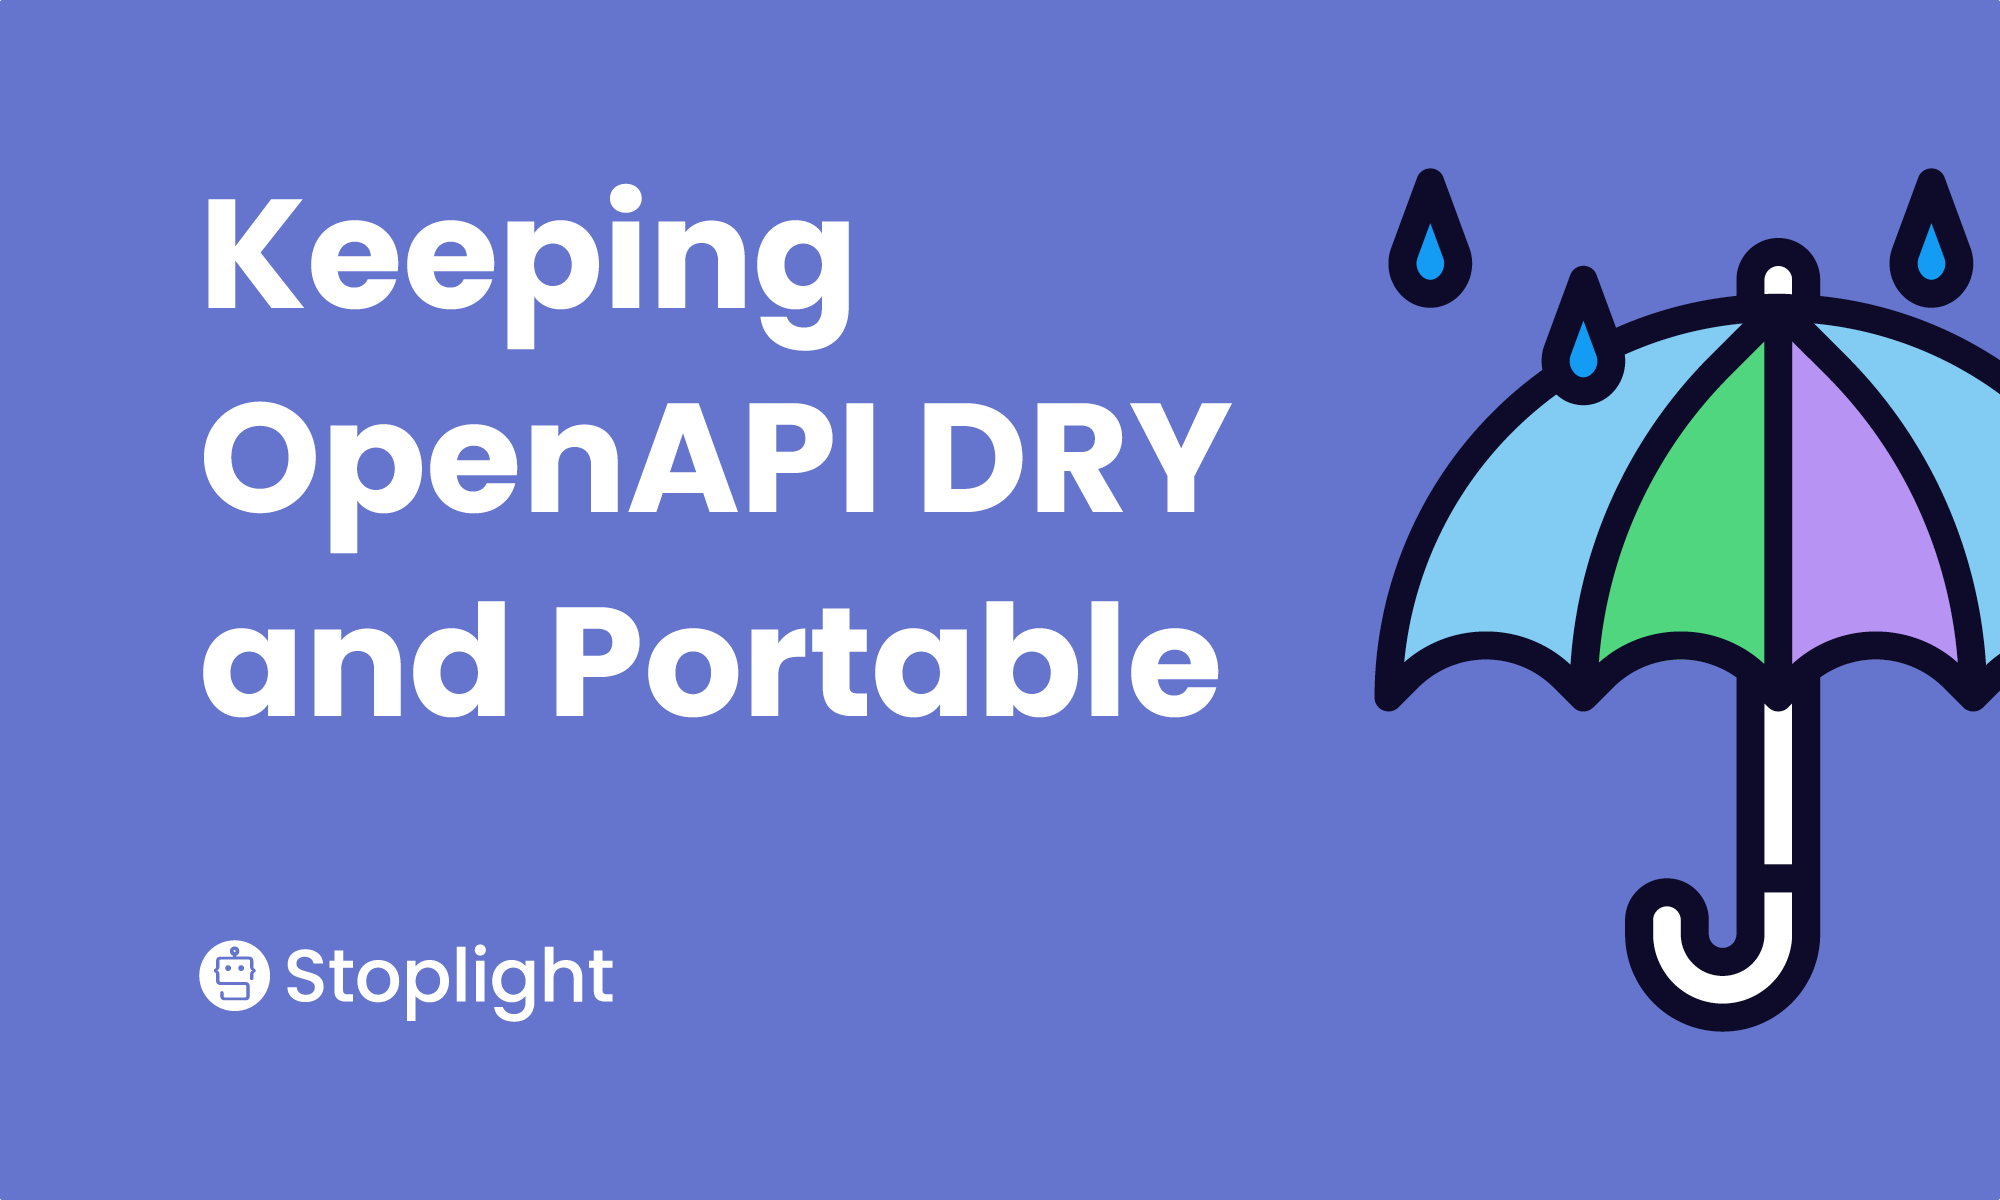 Keeping OpenAPI DRY and Portable